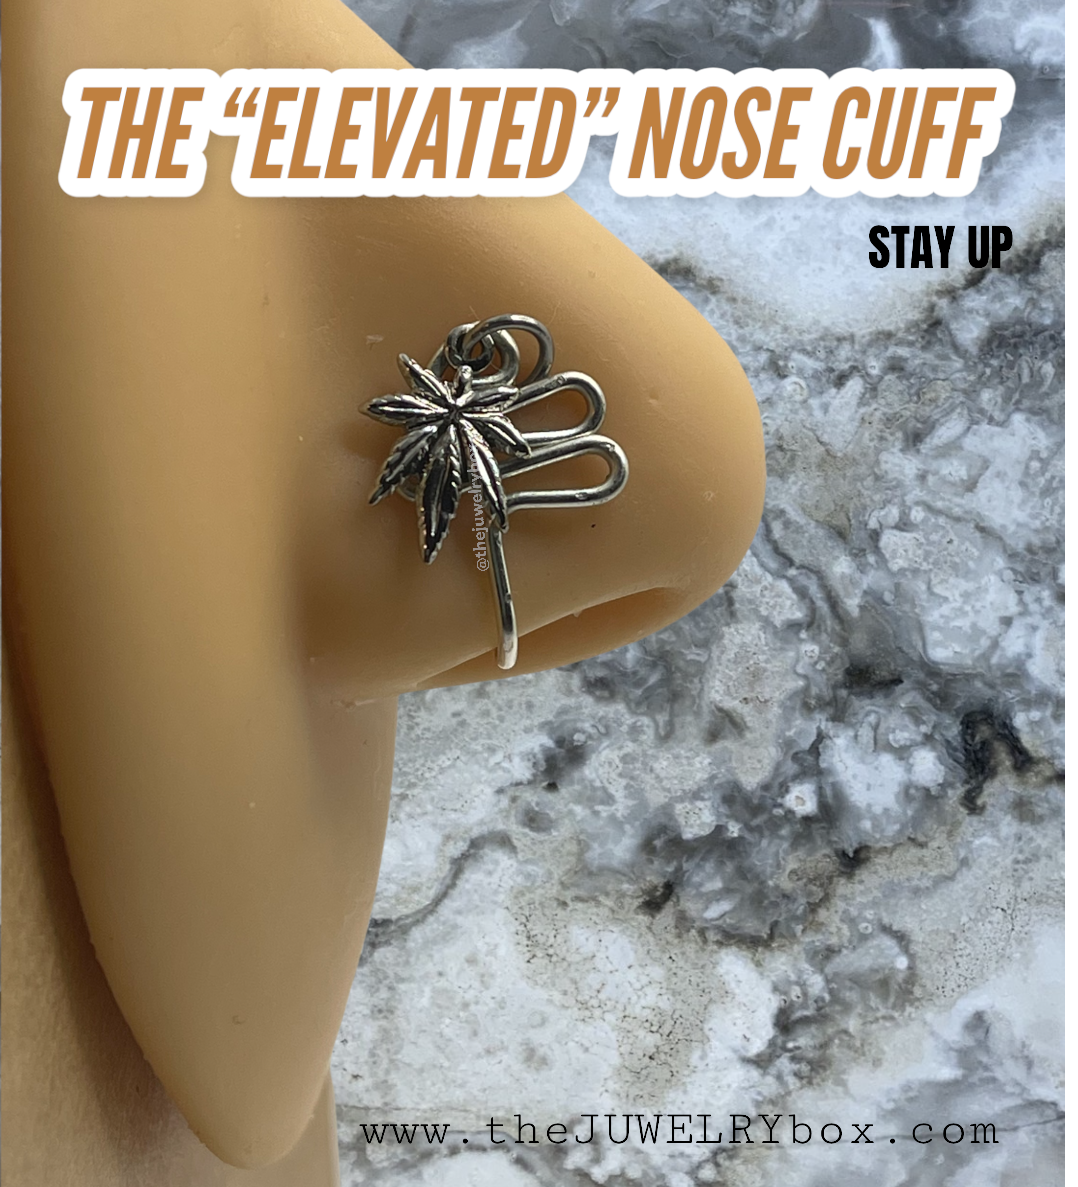 The “ELEVATED” Nose Cuff